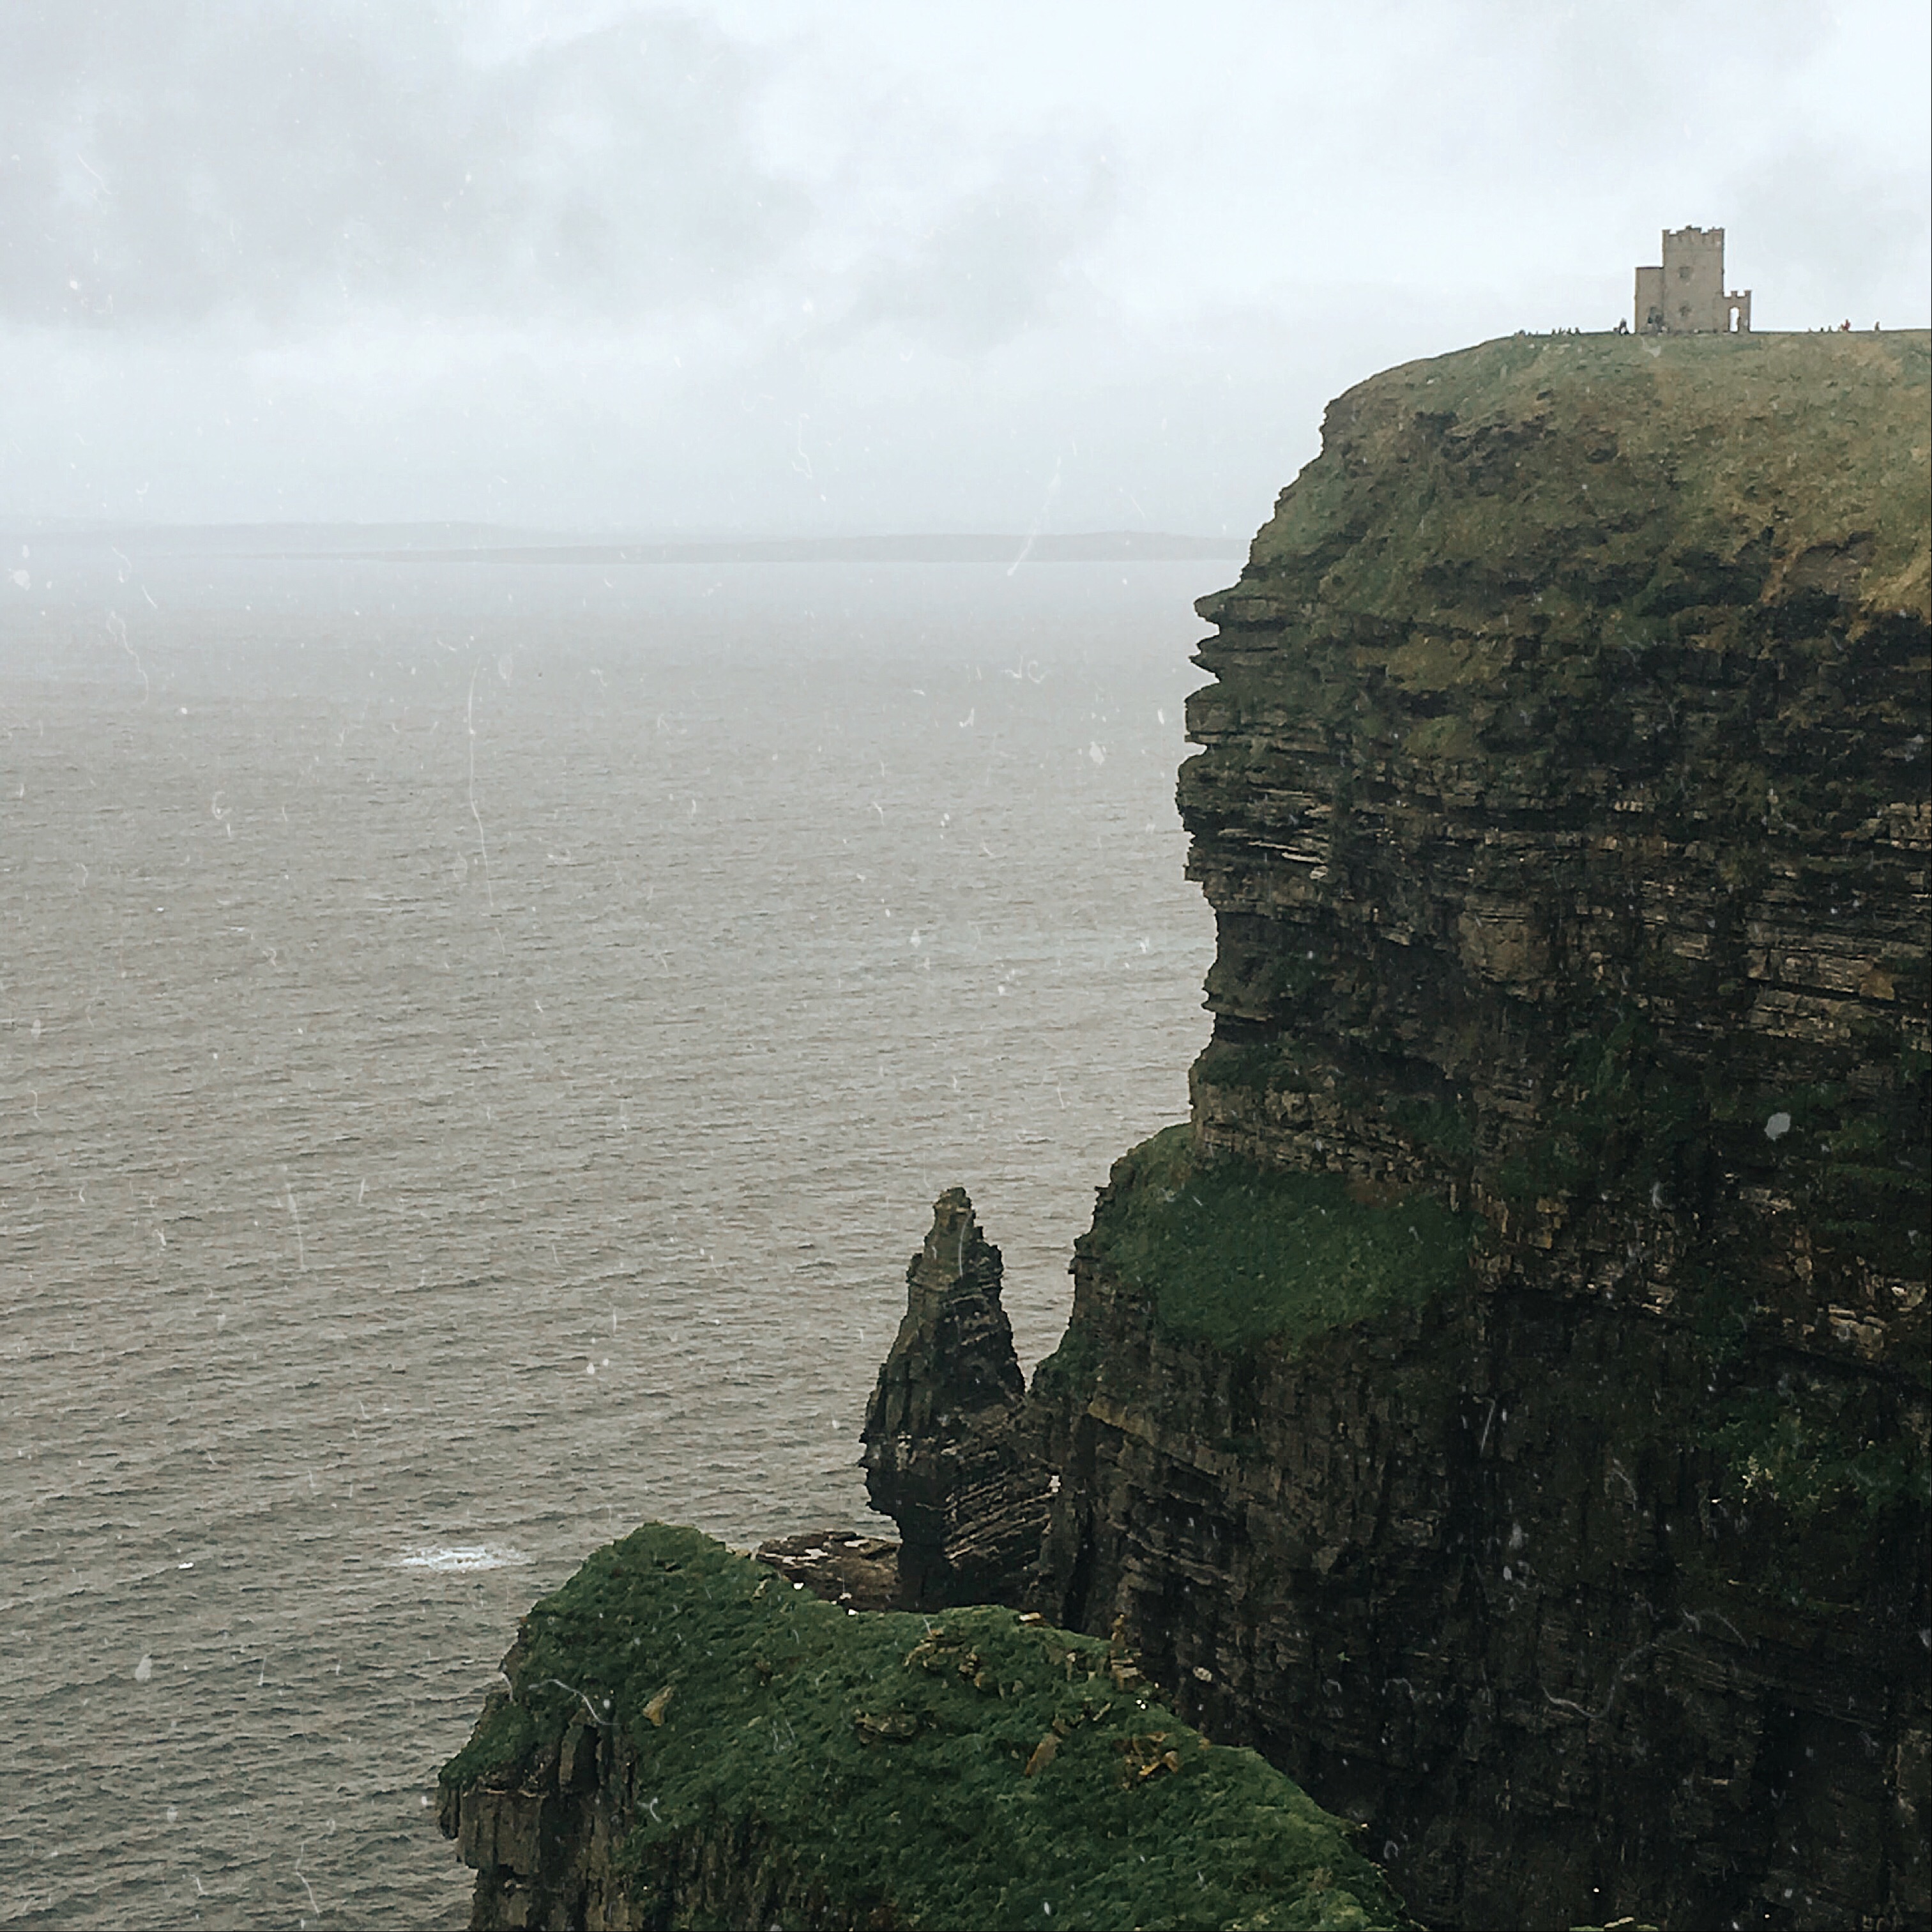 View of O'Brien Tower at the Cliffs of Moher Visitor Center